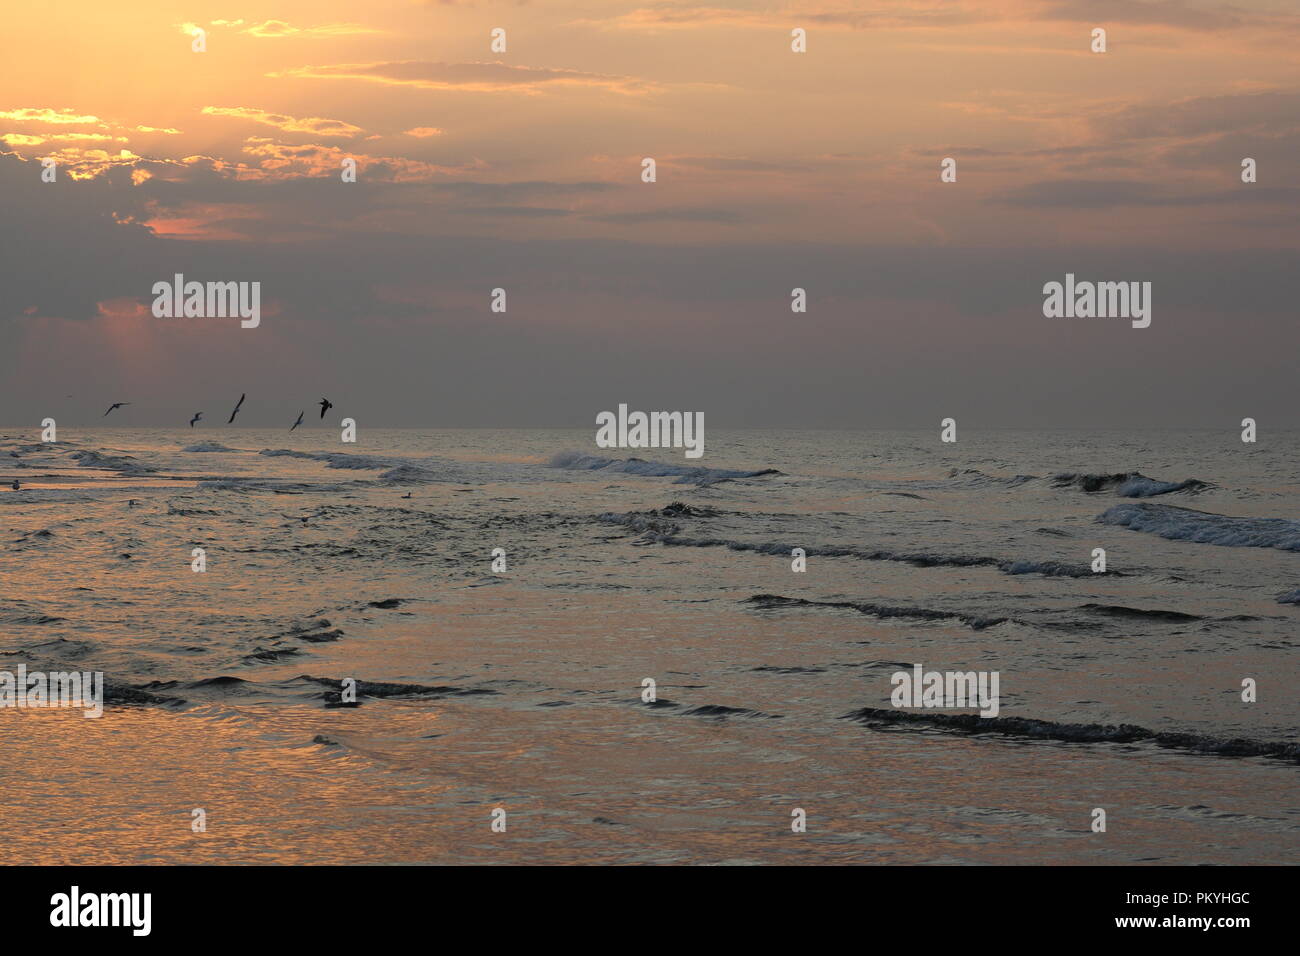 Dramatic sea landscape with silhouettes of seagulls in the distance at sunset Stock Photo